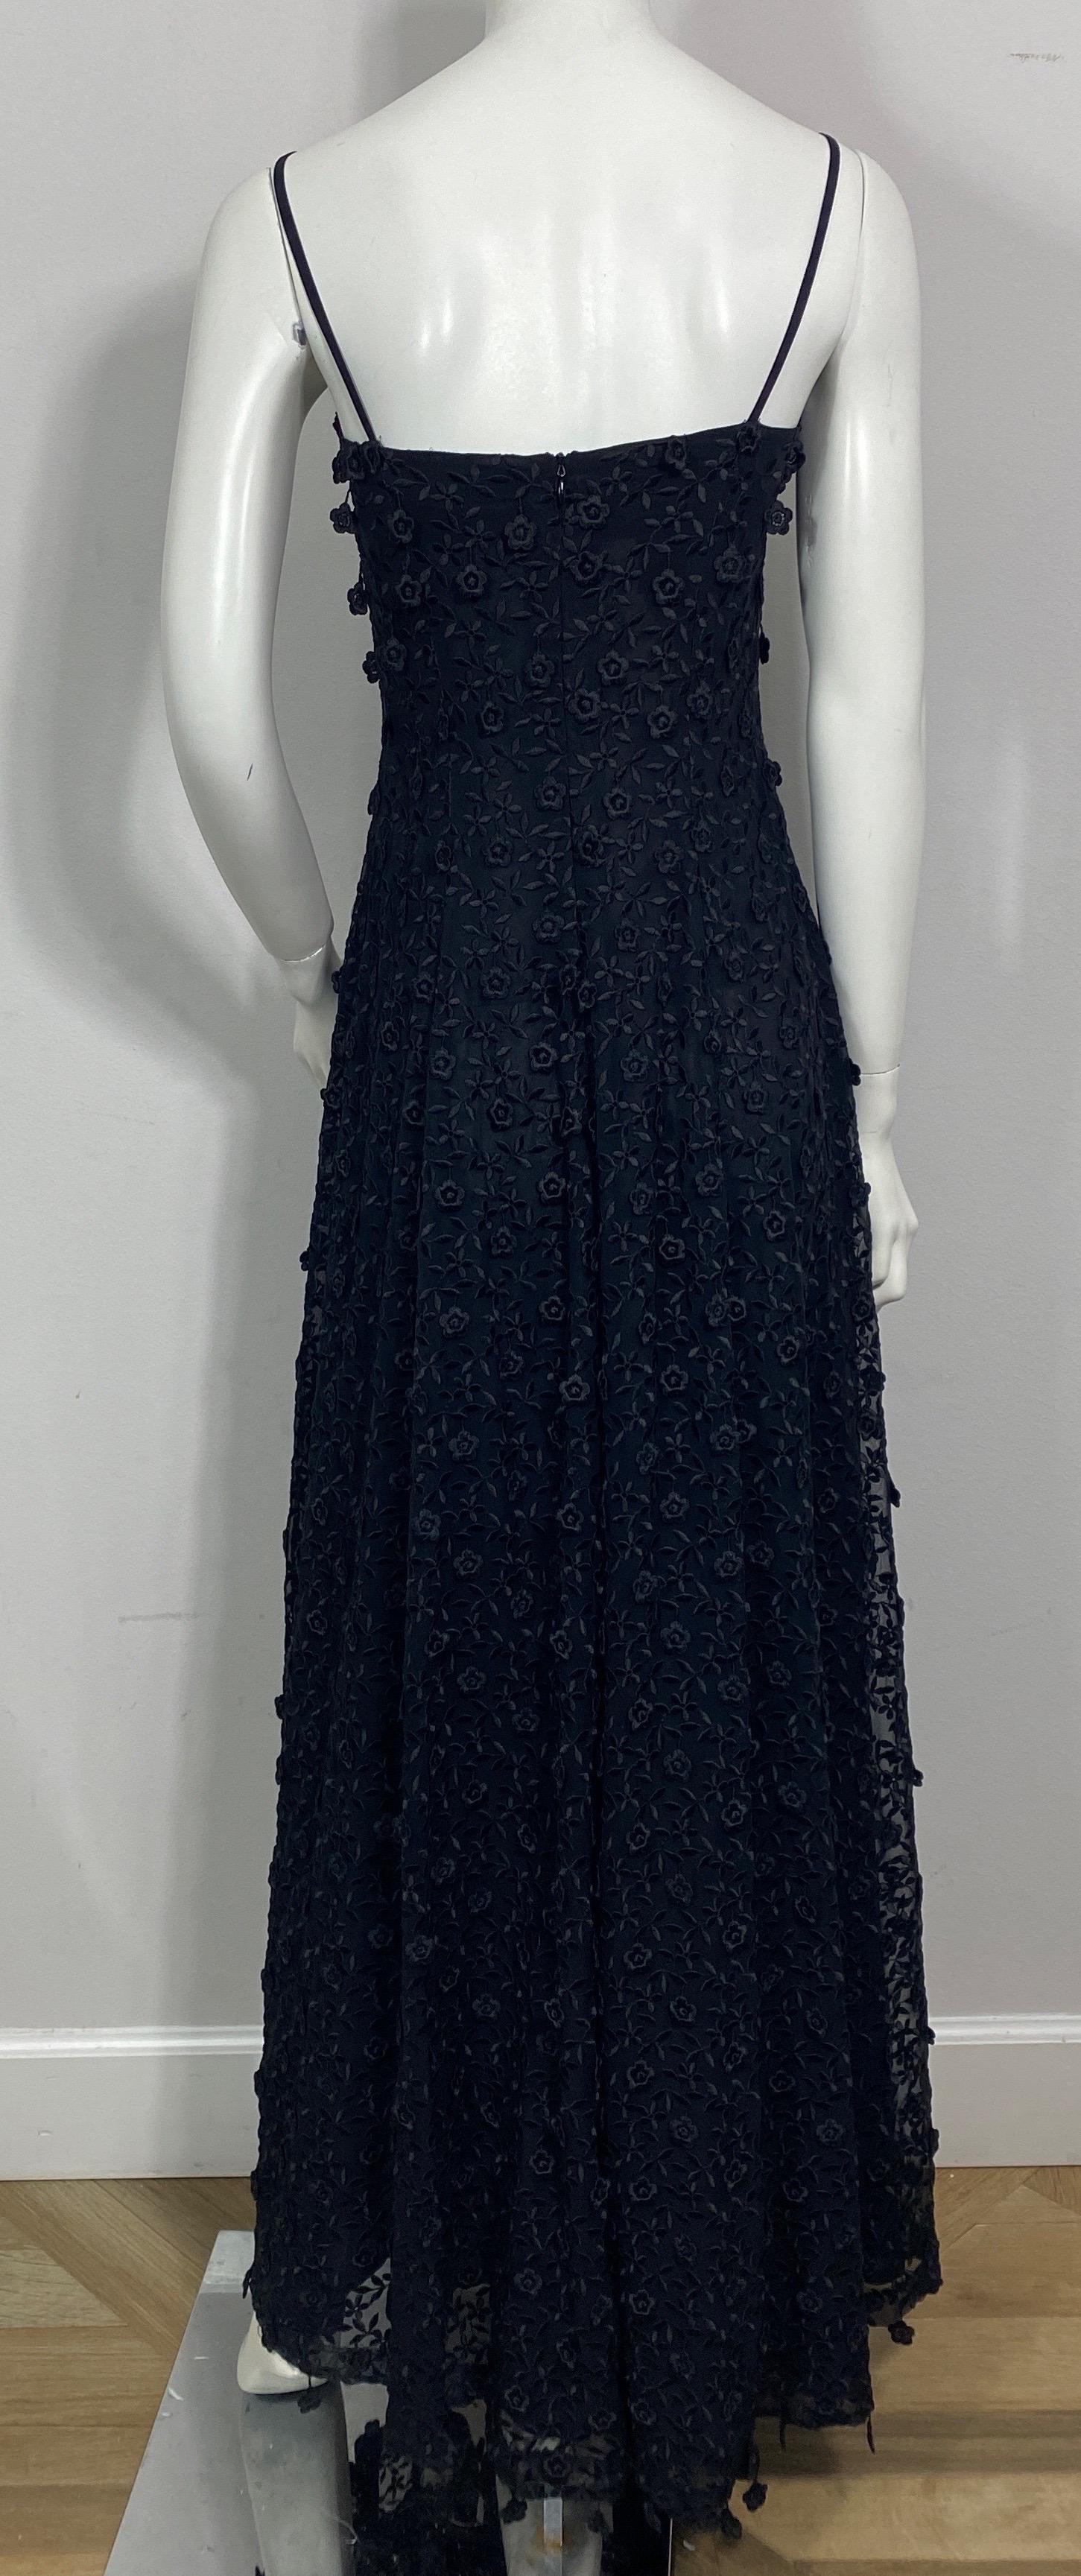 Escada Couture 1990’s Black Embroidered Applique Gown-Size 36 For Sale 3